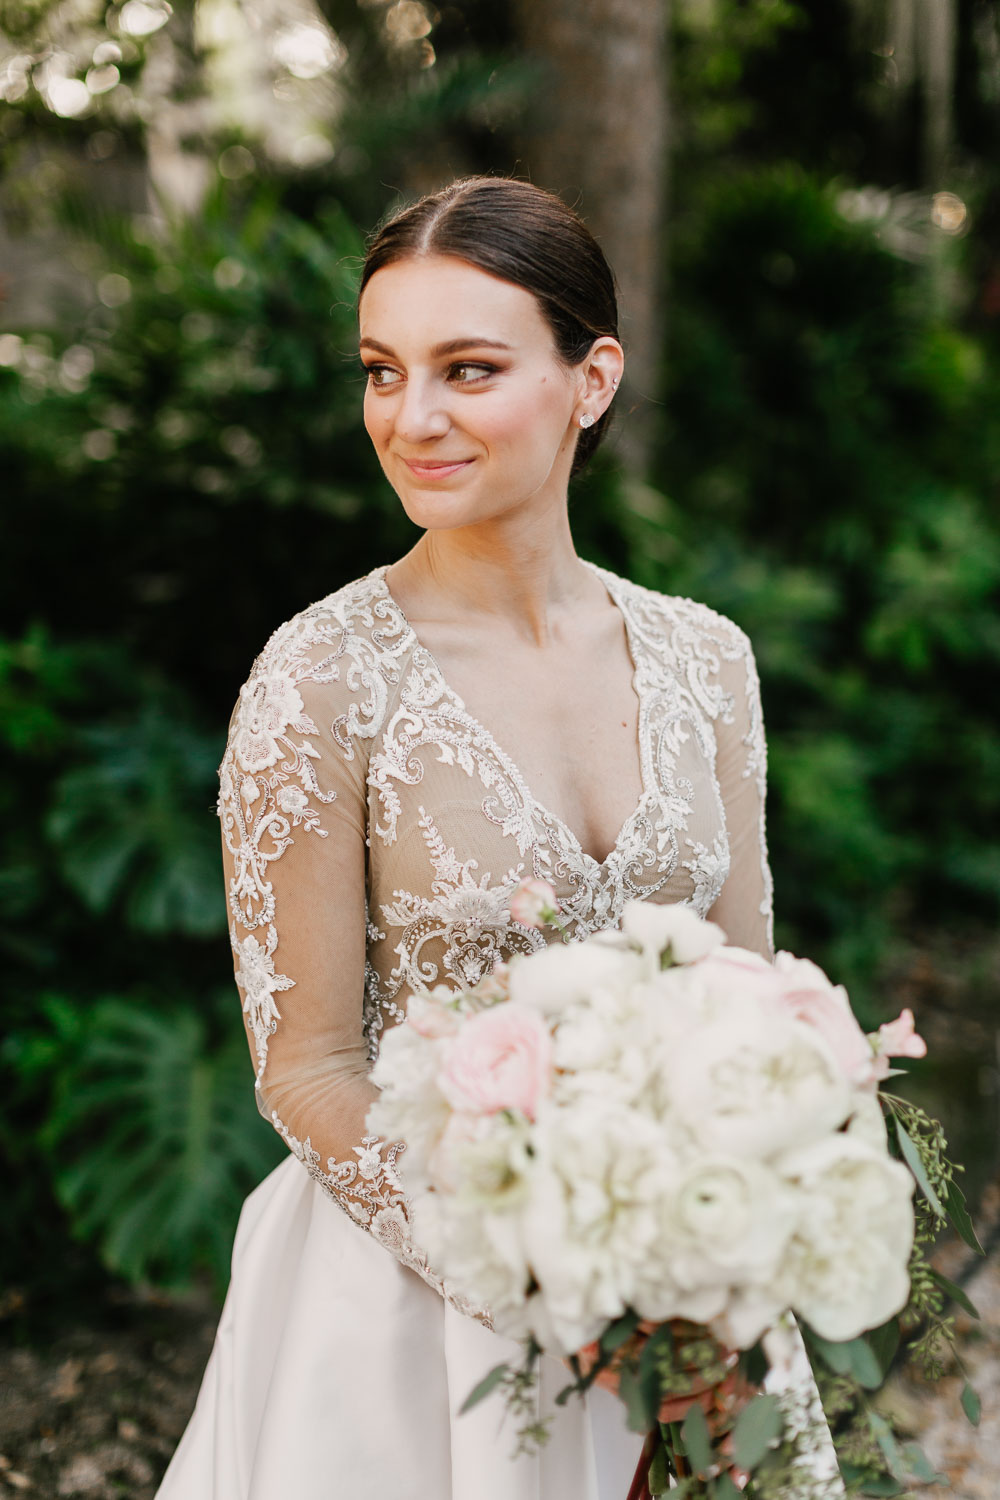 Nighttime Estate Wedding Photography at Vizcaya Museum and Gardens in ...